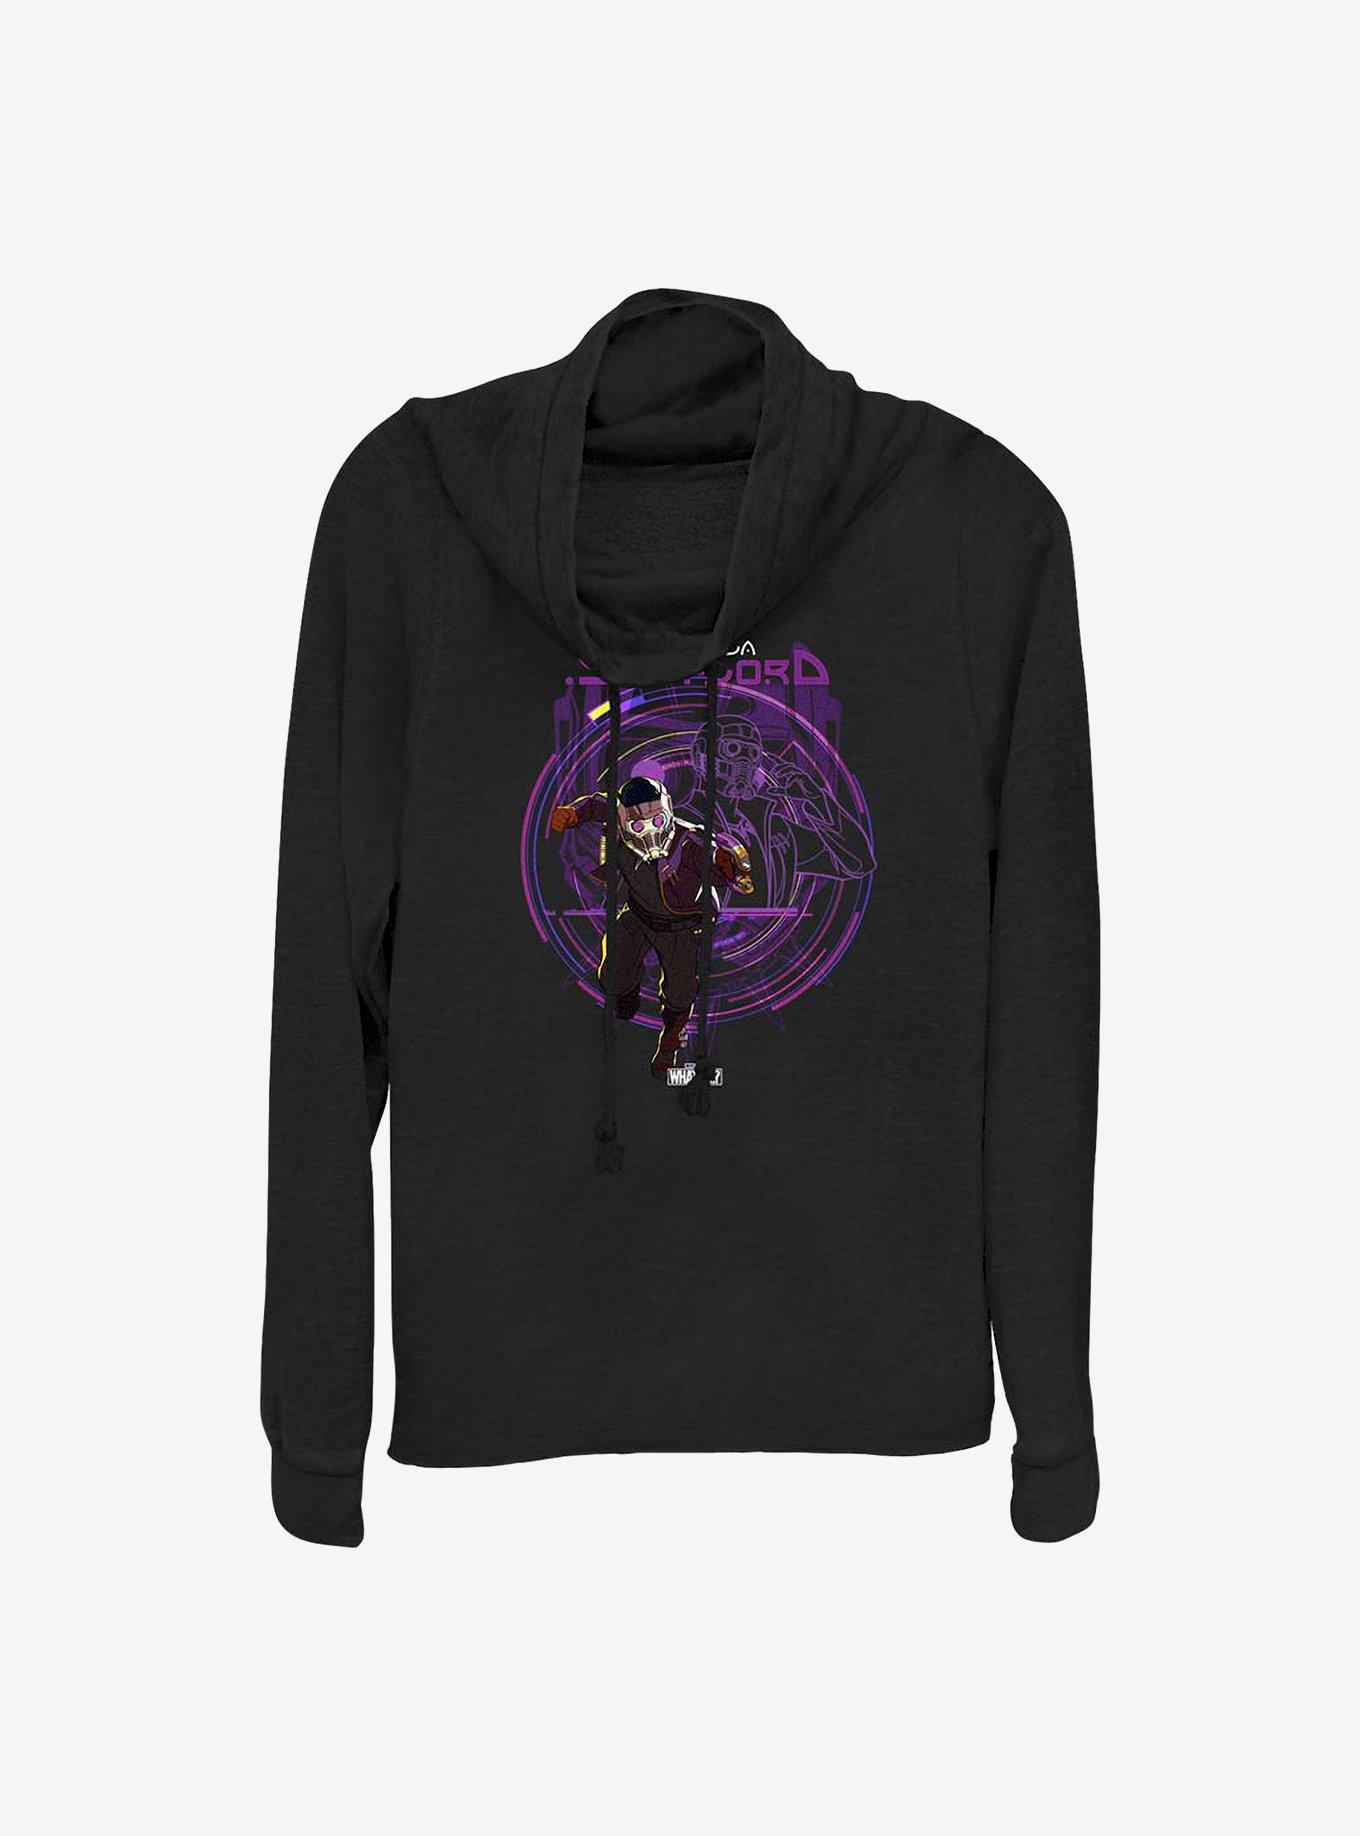 Marvel What If...? T'Challa Star-Lord Cowlneck Long-Sleeve Girls Top, BLACK, hi-res